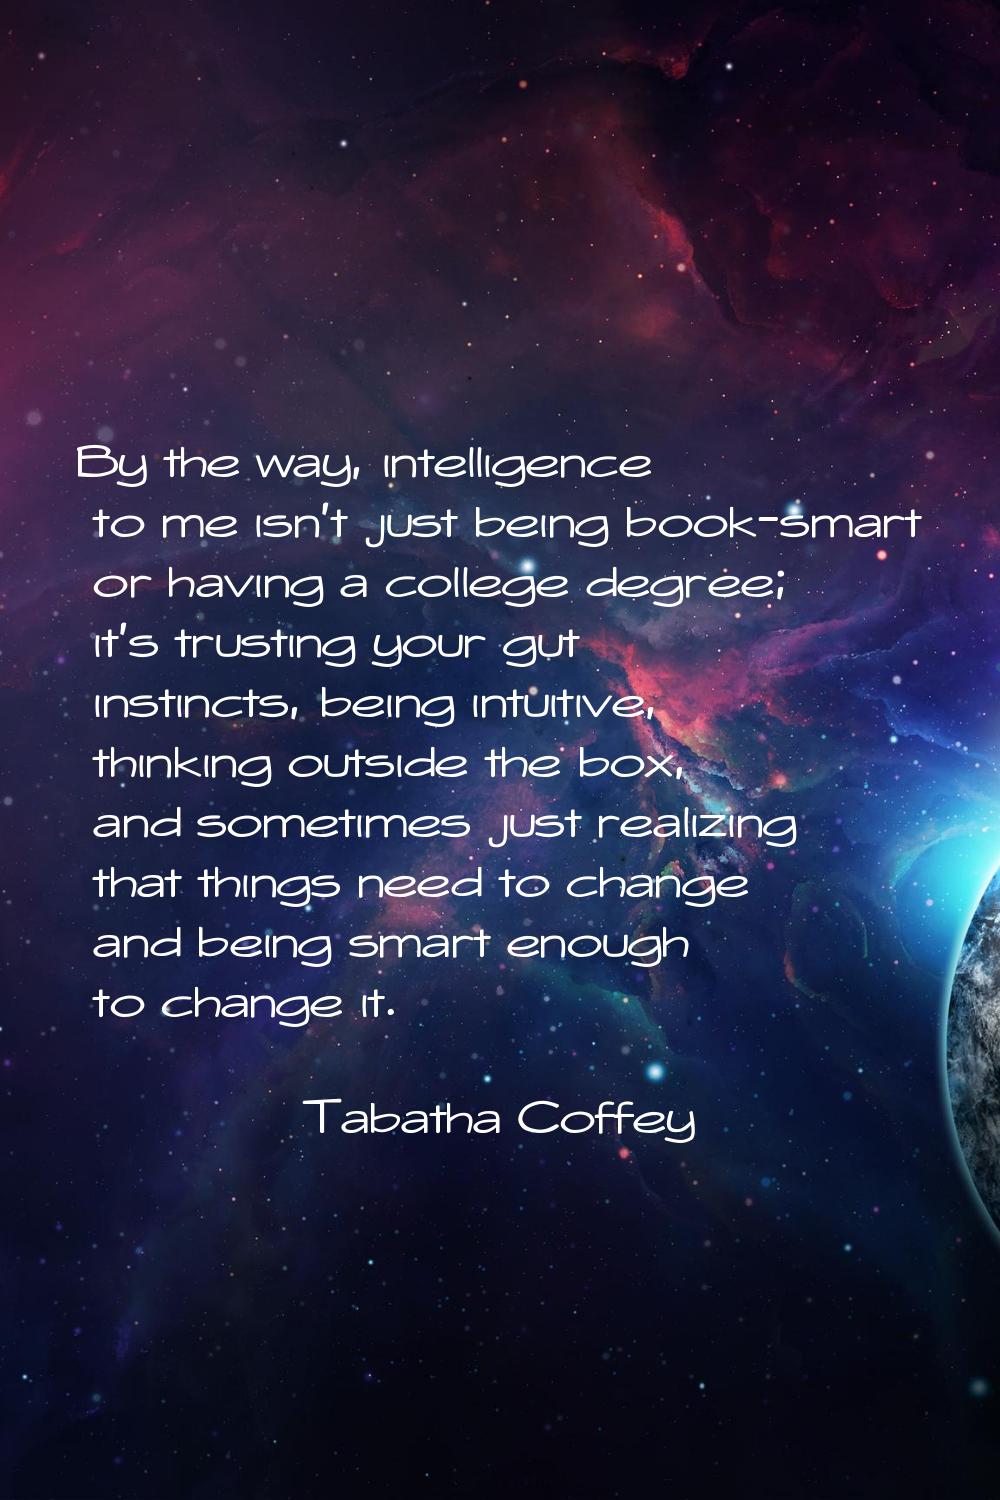 By the way, intelligence to me isn't just being book-smart or having a college degree; it's trustin